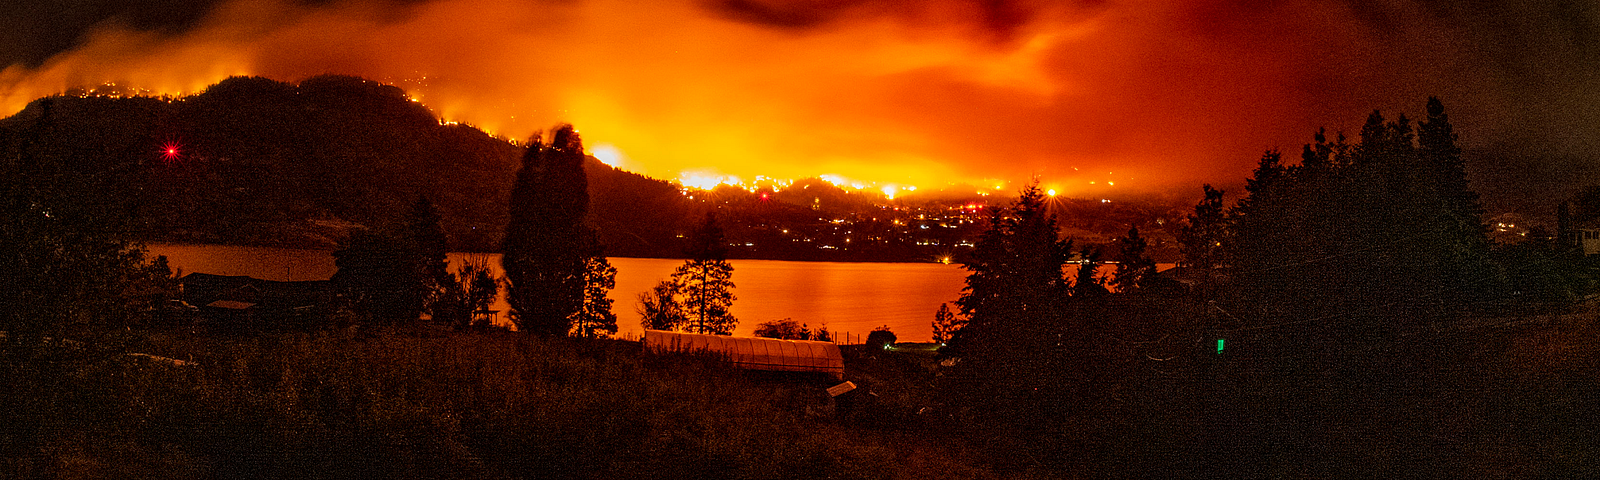 A forest fire burns in the Okanagan Valley lighting up the night sky.